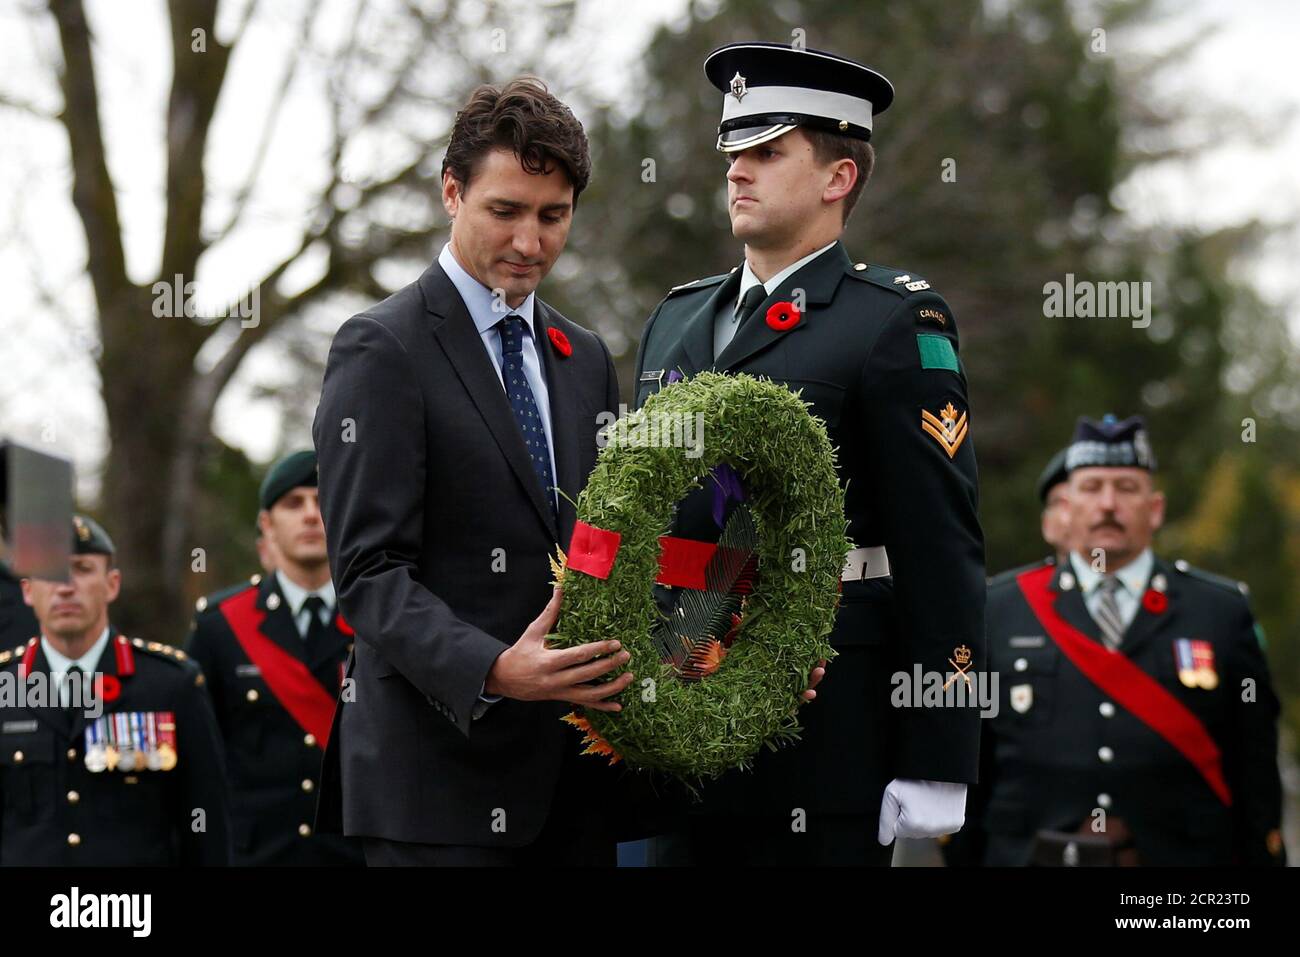 Canada's Prime Minister Justin Trudeau lays a wreath during an event to mark the upcoming Veterans' Week and 100th anniversary of the Battle of Passchendaele at the National Military Cemetery in Ottawa, Ontario, Canada, November 3, 2017. REUTERS/Chris Wattie Stock Photo